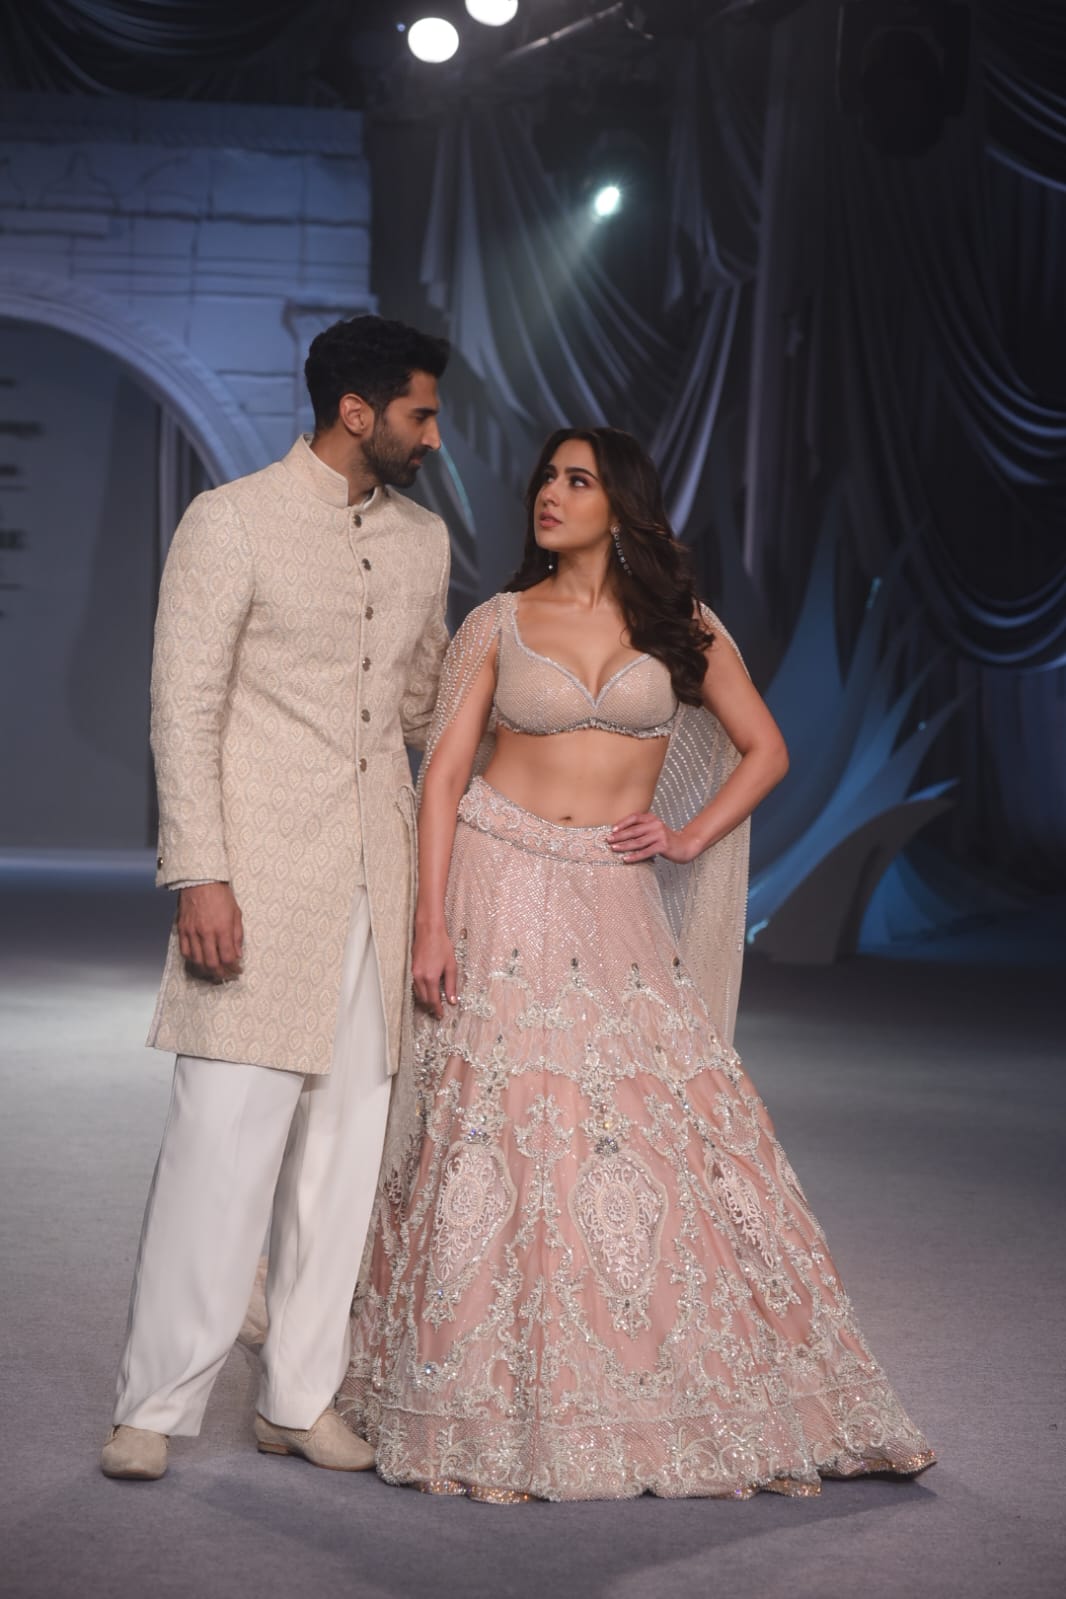 Siddhant Chaturvedi reveals he was extremely nervous before his ramp walk  with Shanaya Kapoor